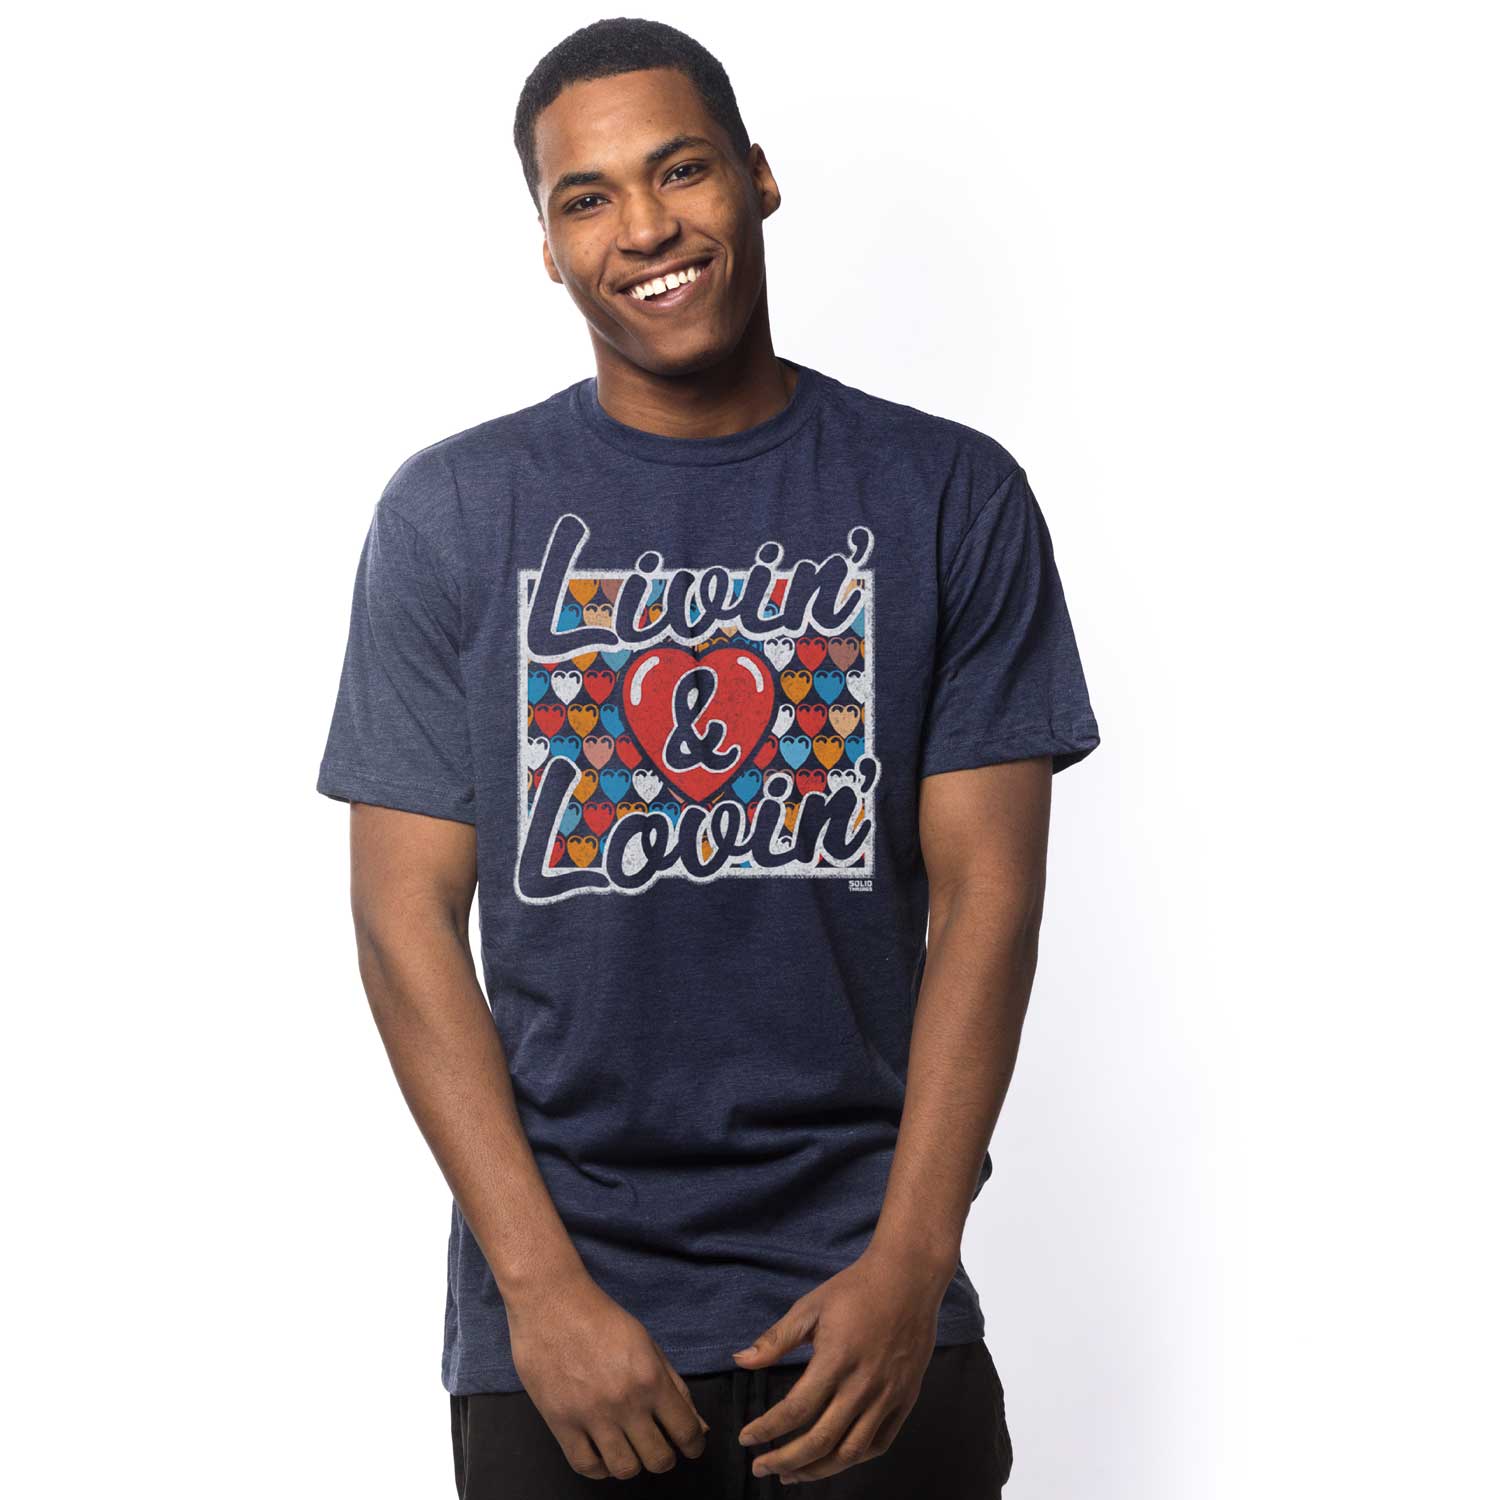 Men's Livin & Lovin Vintage Music Graphic Tee | Cool 80s Classic Rock T-shirt | Solid Threads